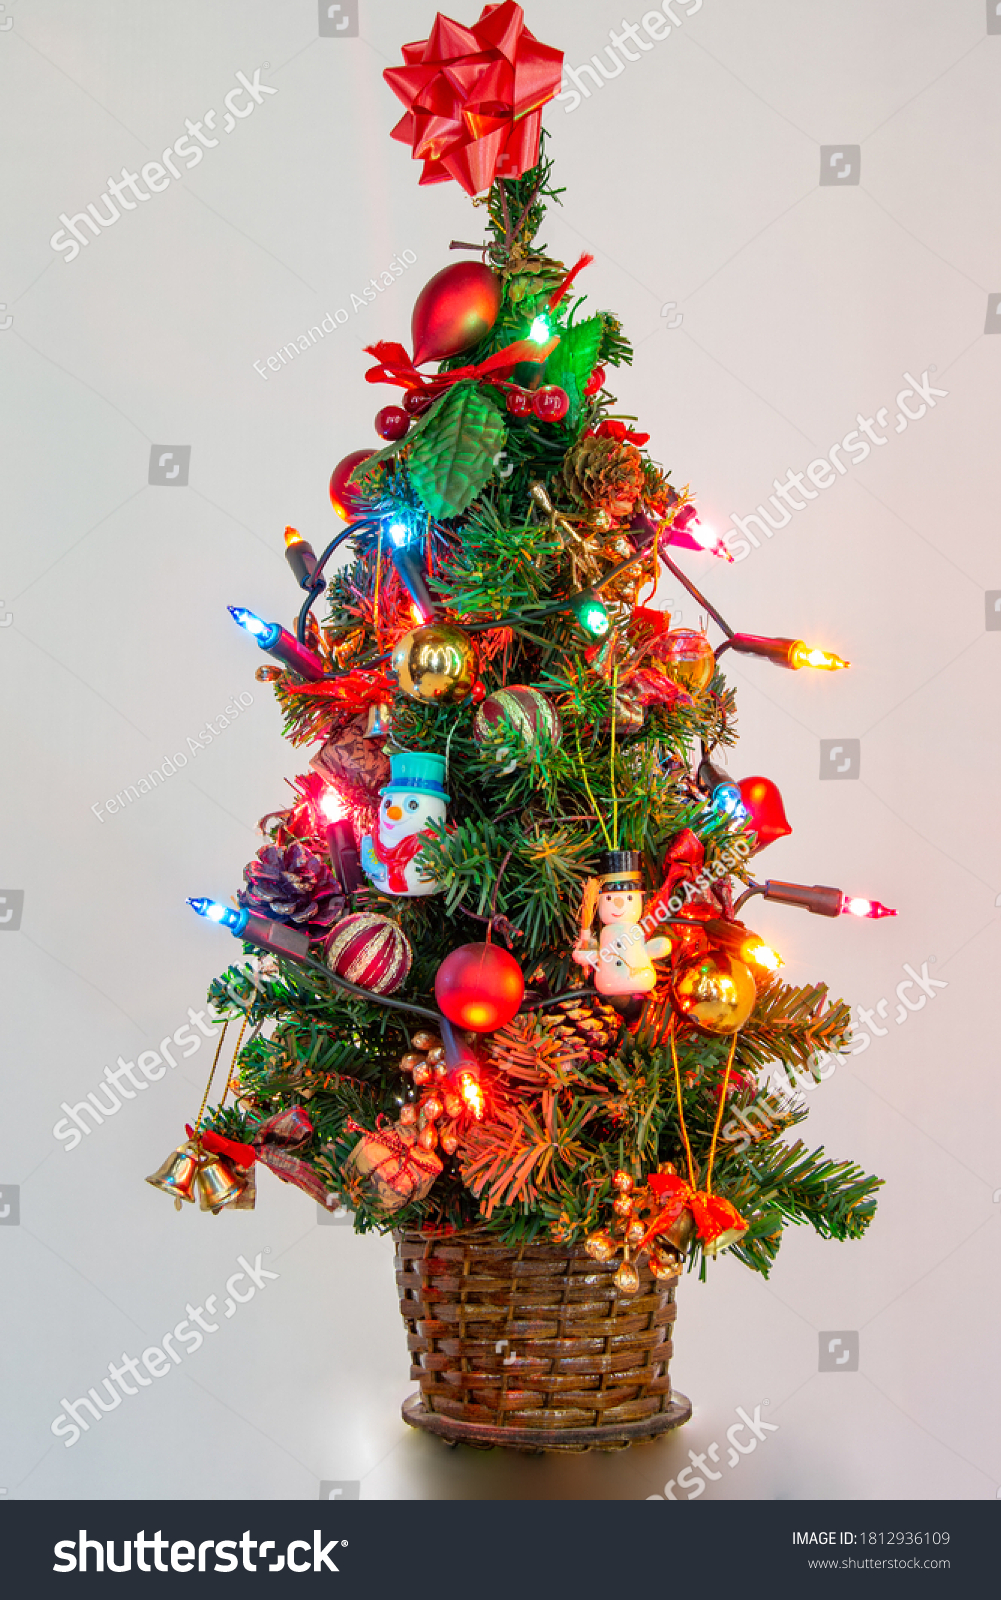 Green Christmas tree with lights decorated with typical figures of the date, with red balls, with mini gifts, and a red bow at the top of the tree with a white background. Vertical photography. #1812936109